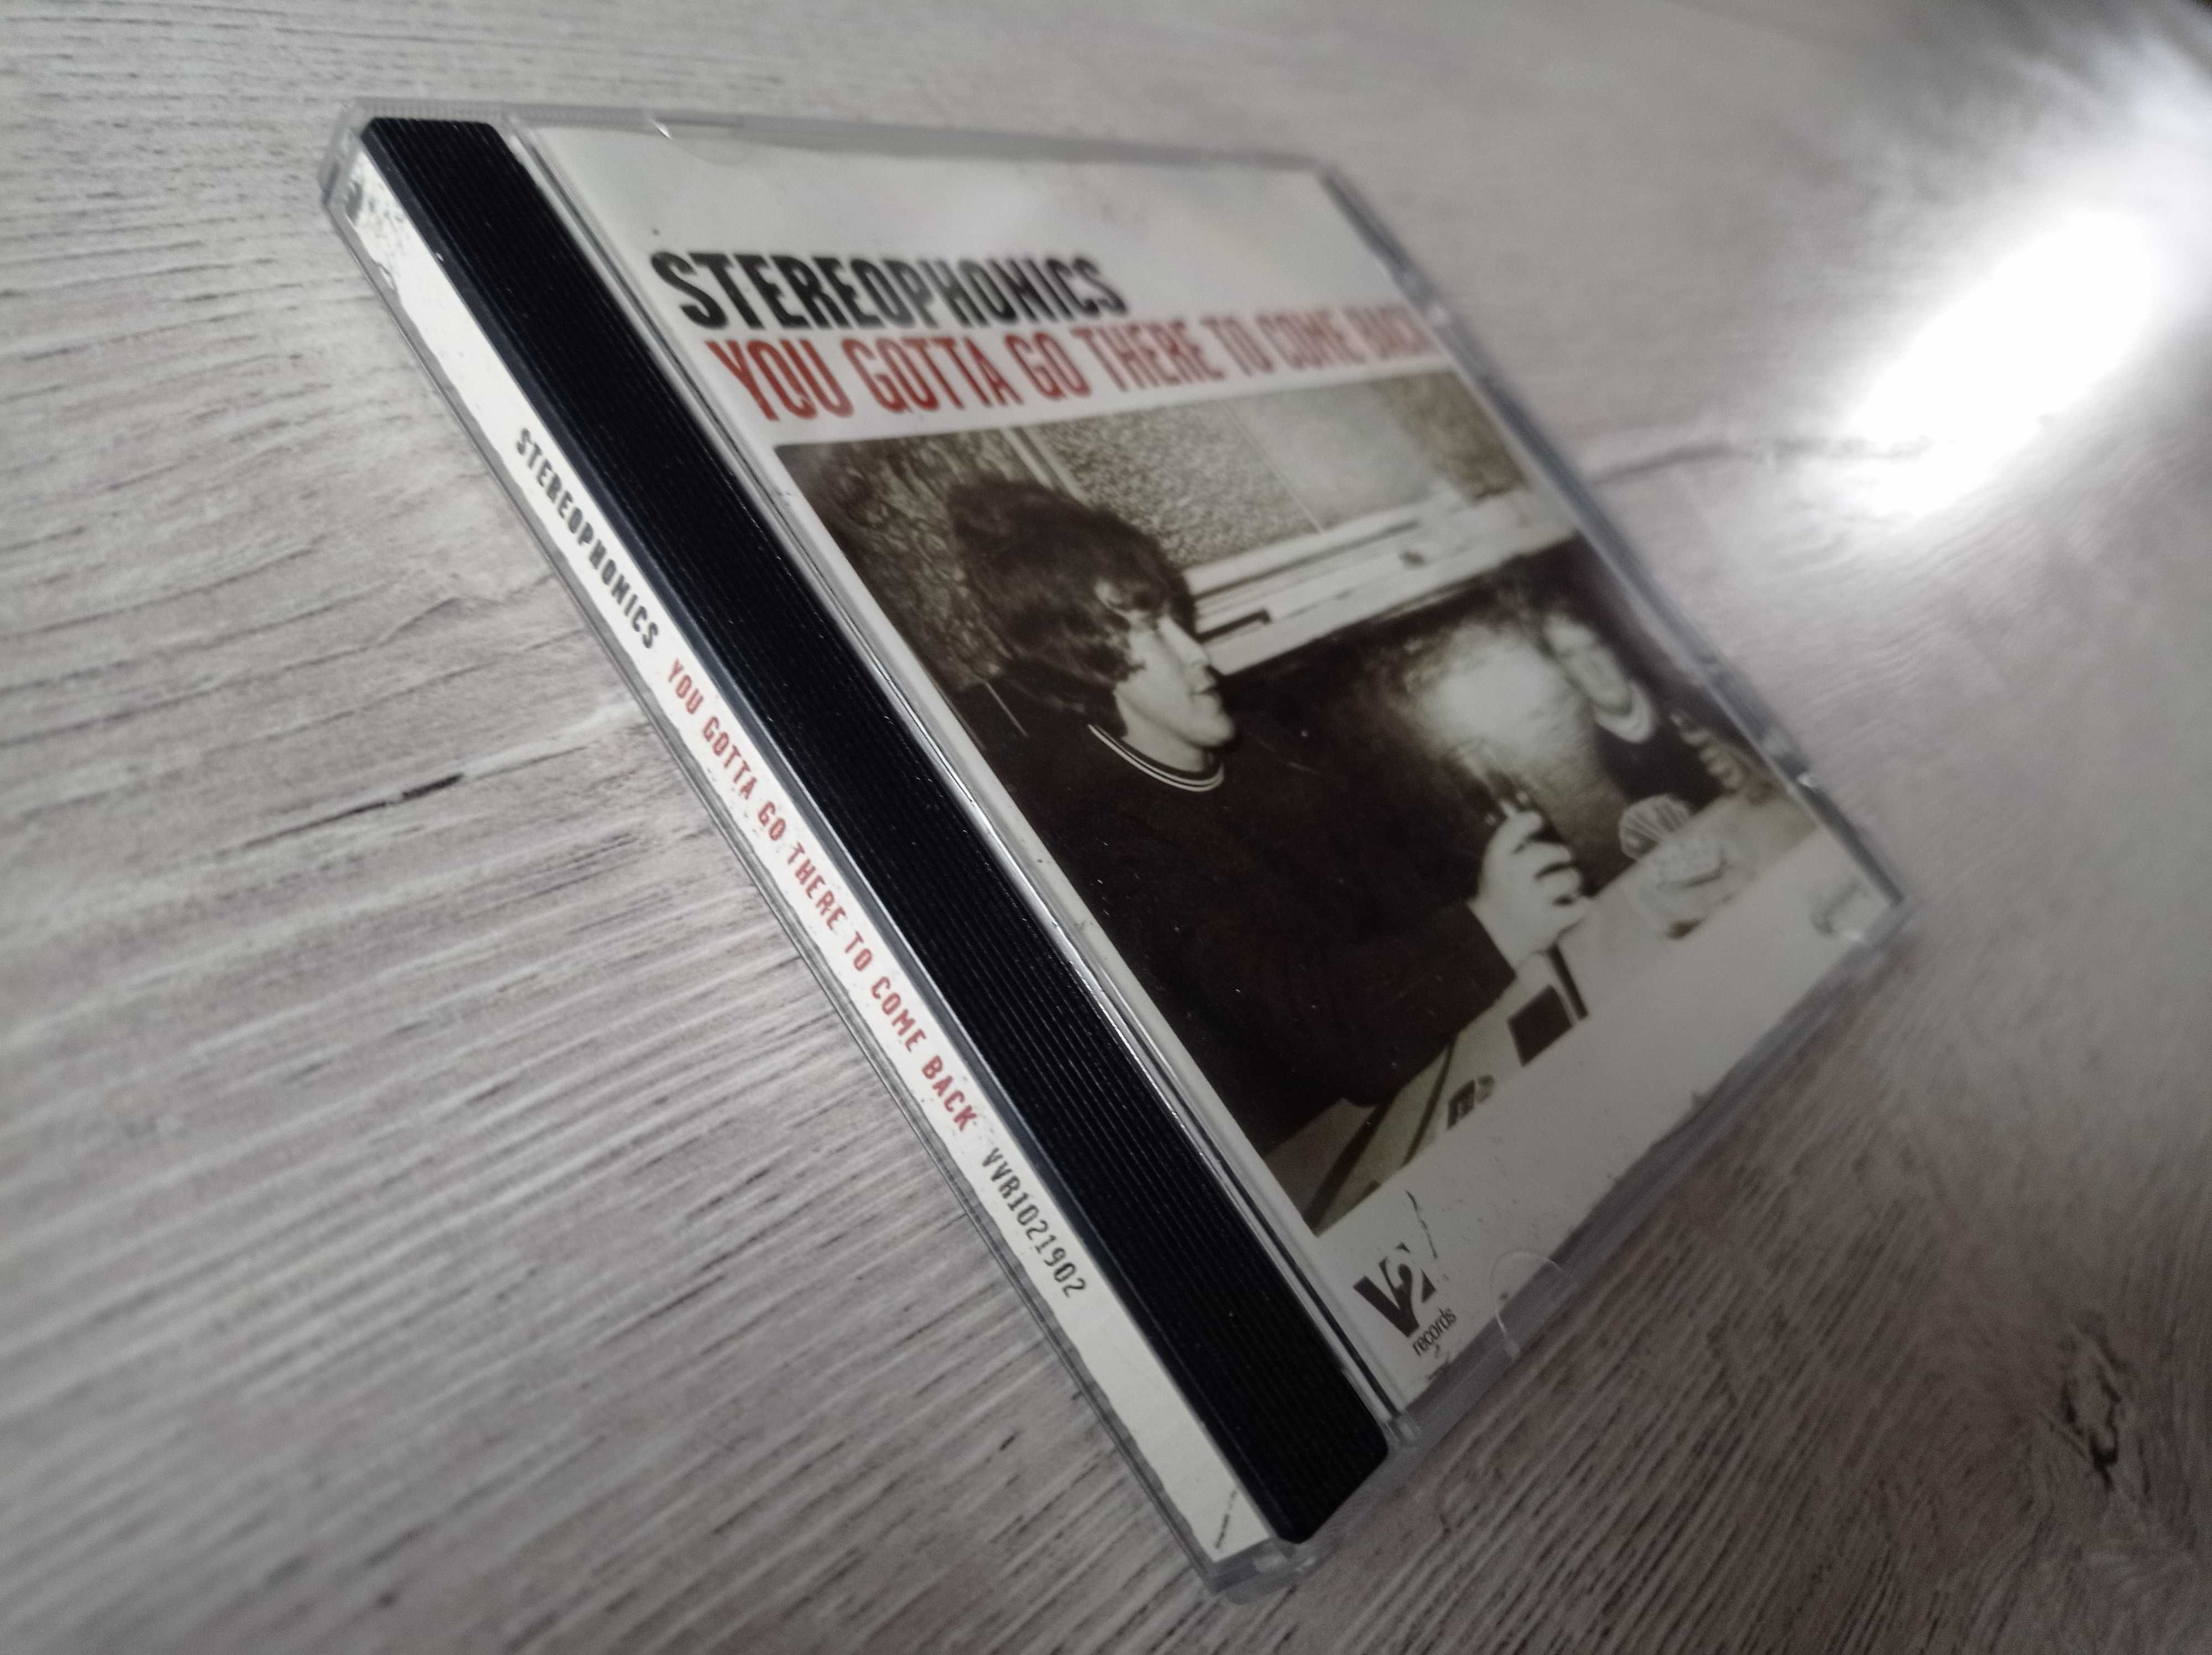 Stereophonics – You Gotta Go There To Come Back – cd - wyprzedaż